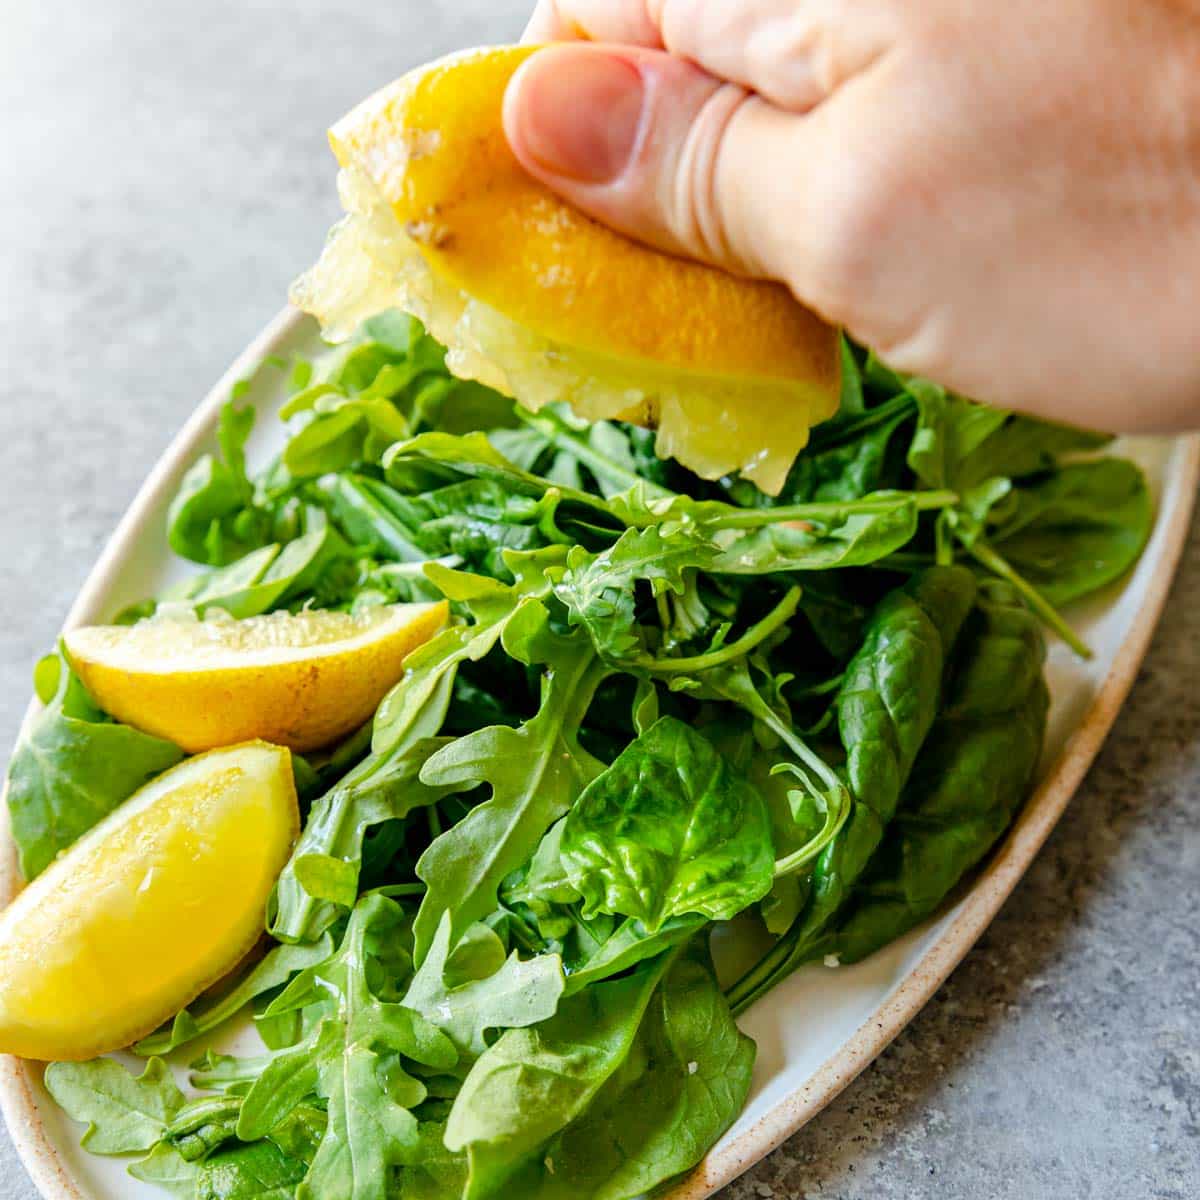 squeezing lemon over greens